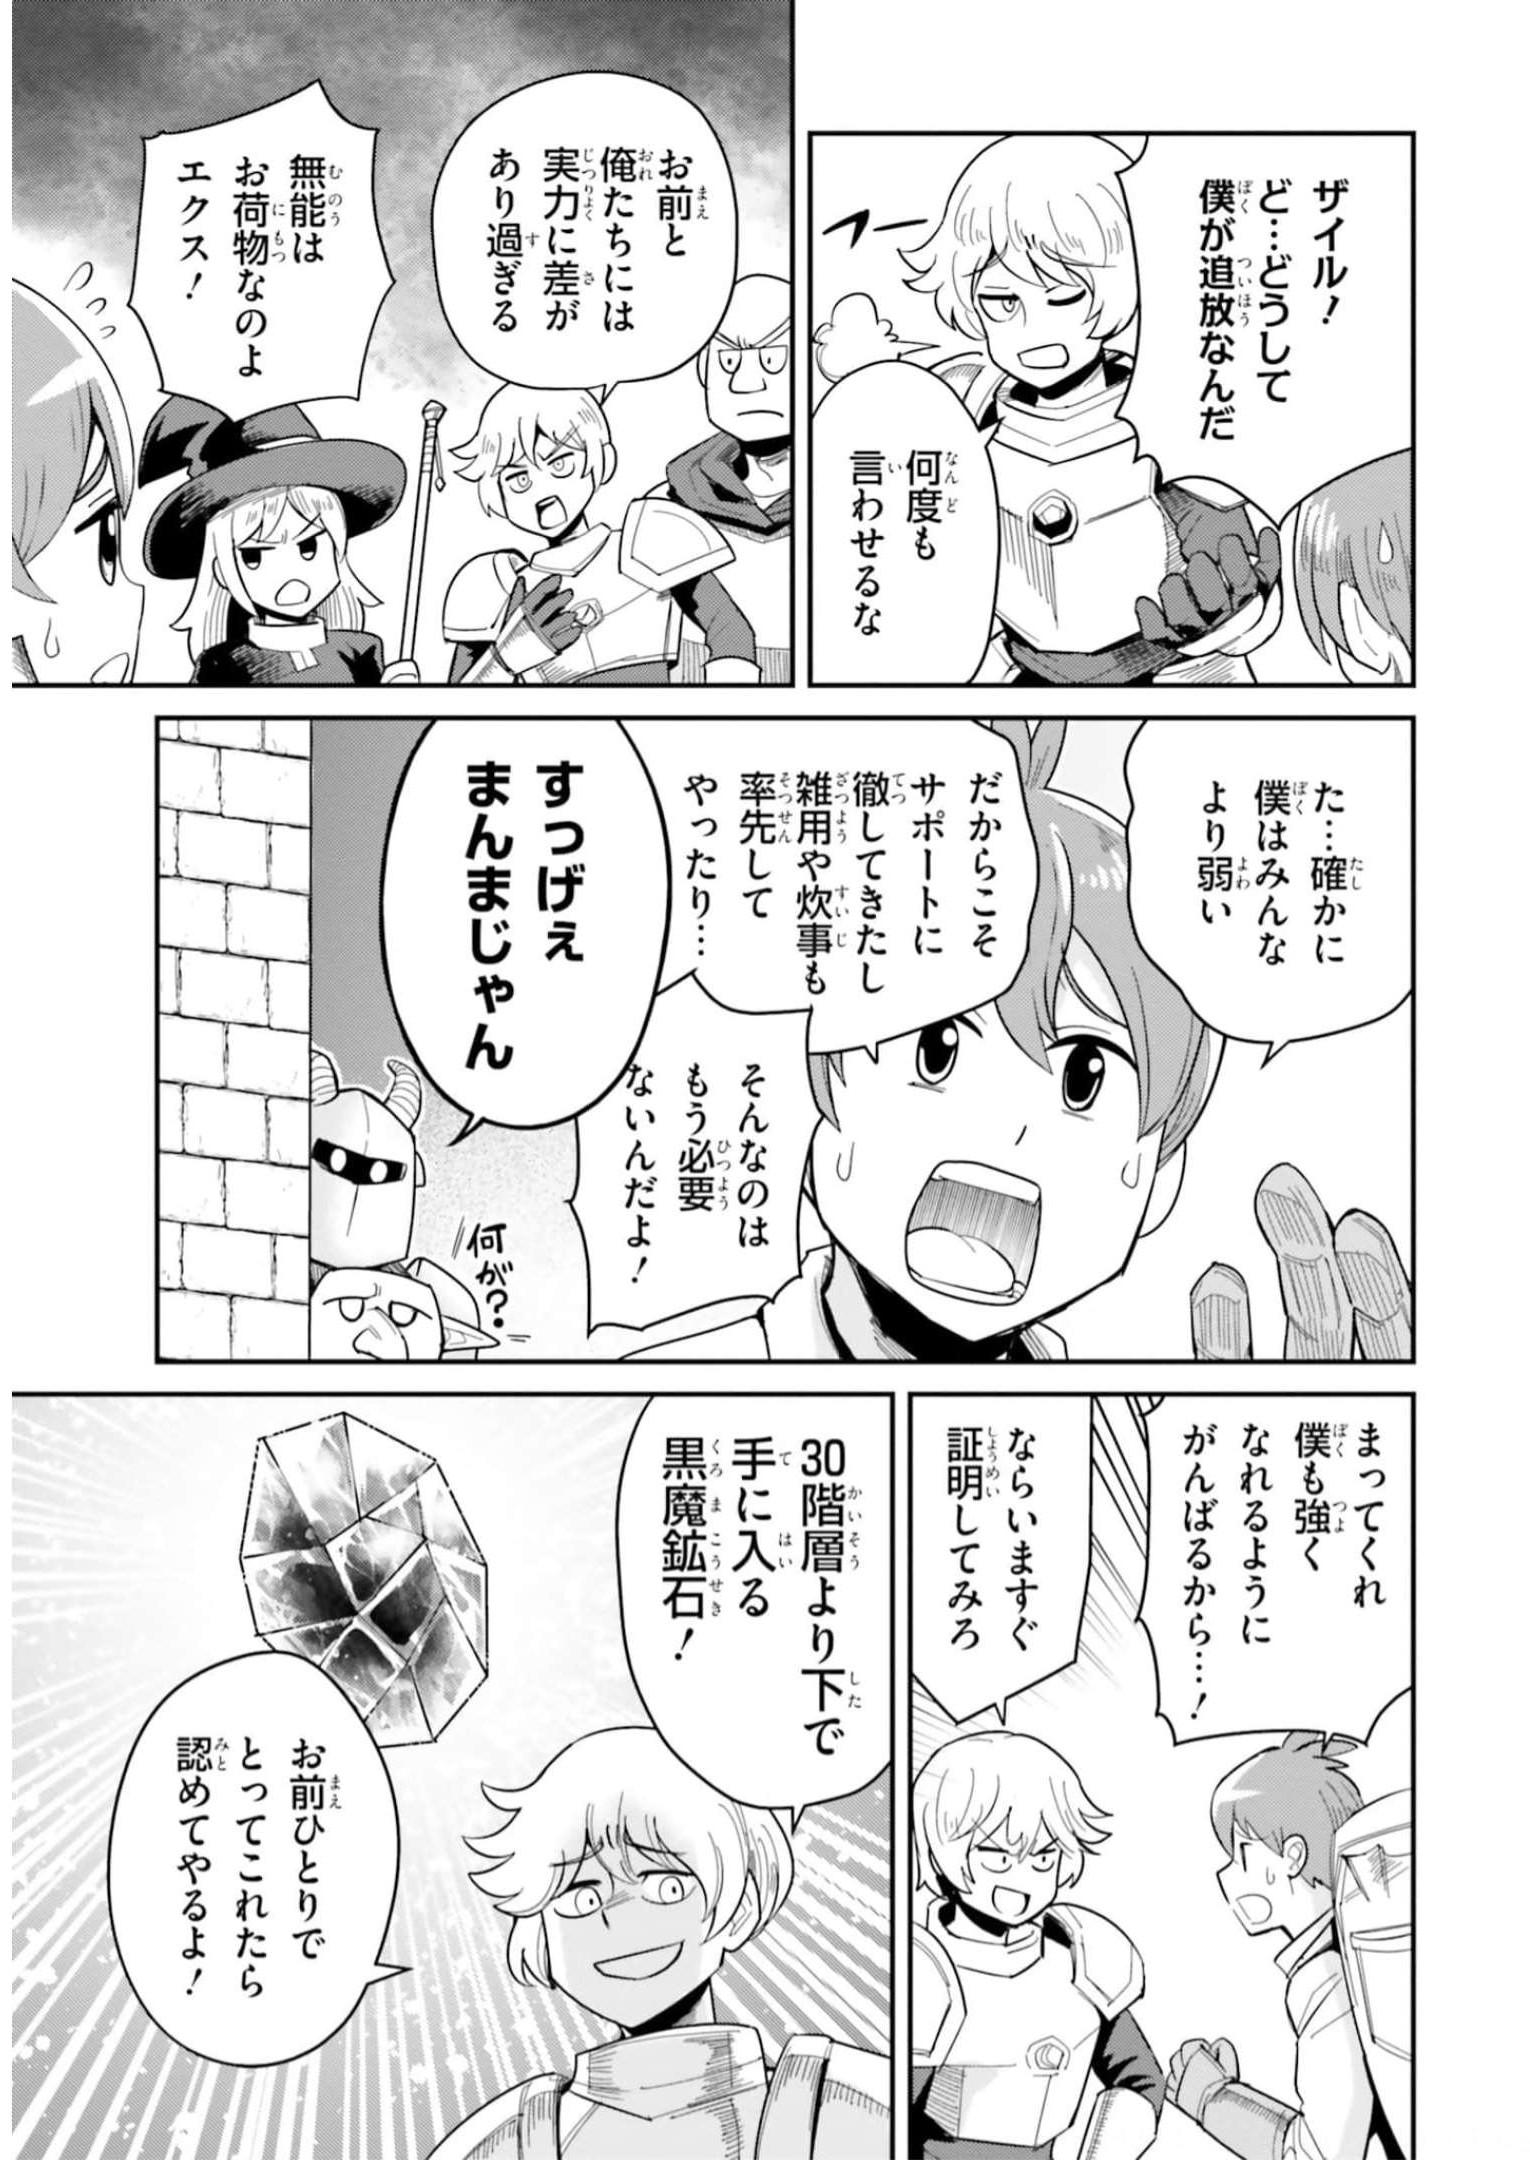 Dungeon Friends Forever Dungeon’s Childhood Friend ダンジョンの幼なじみ 第25話 - Page 5